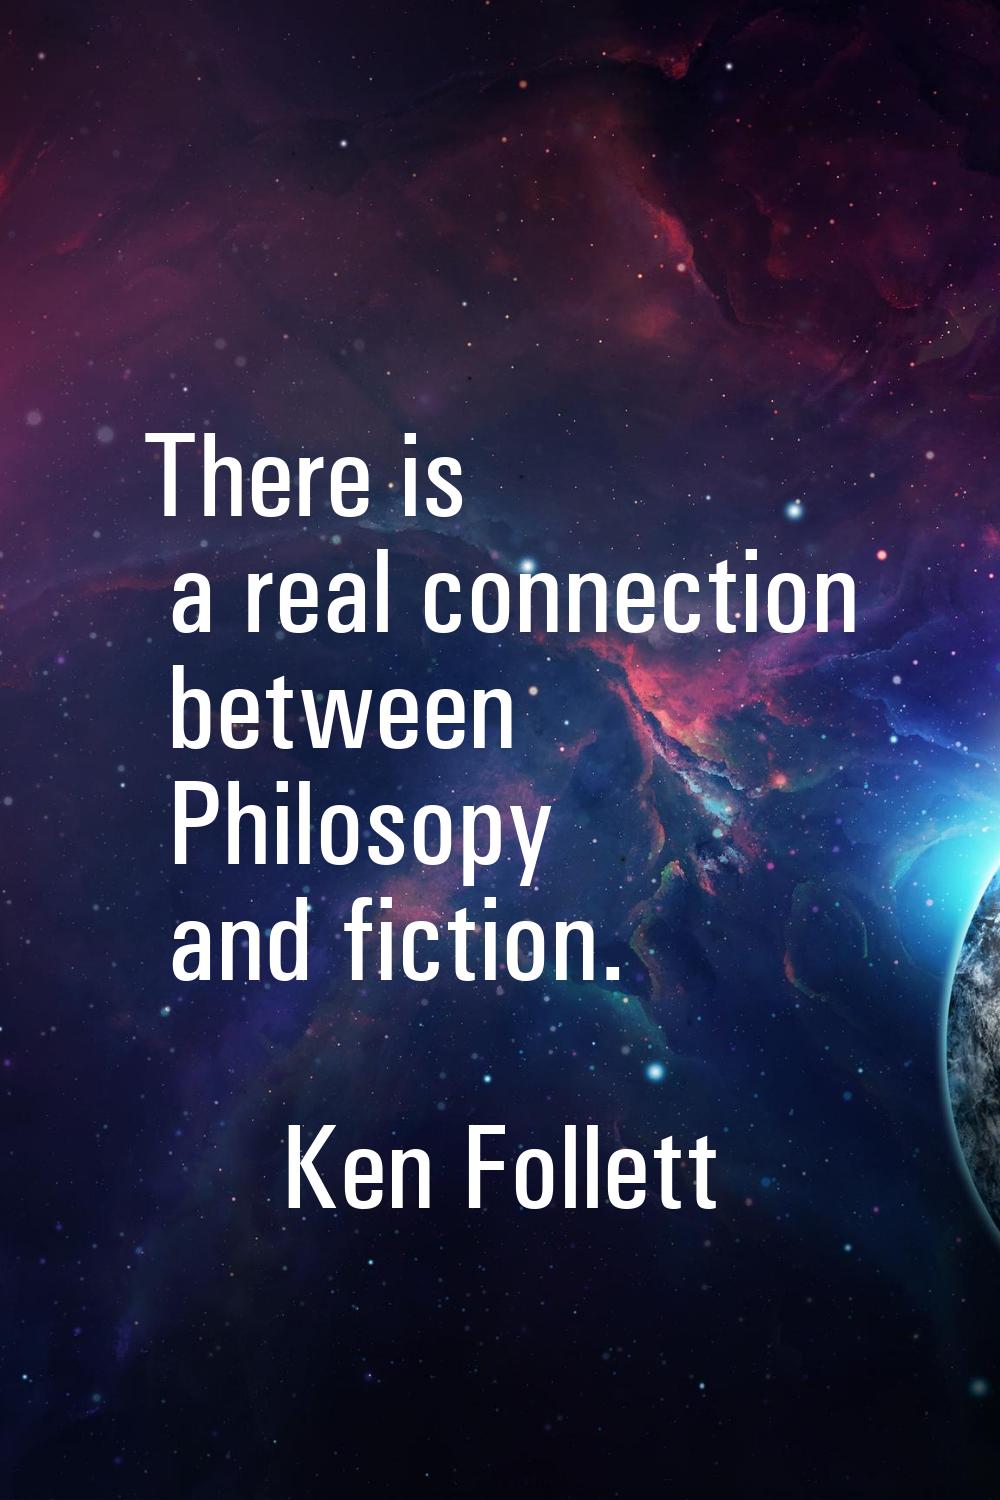 There is a real connection between Philosopy and fiction.